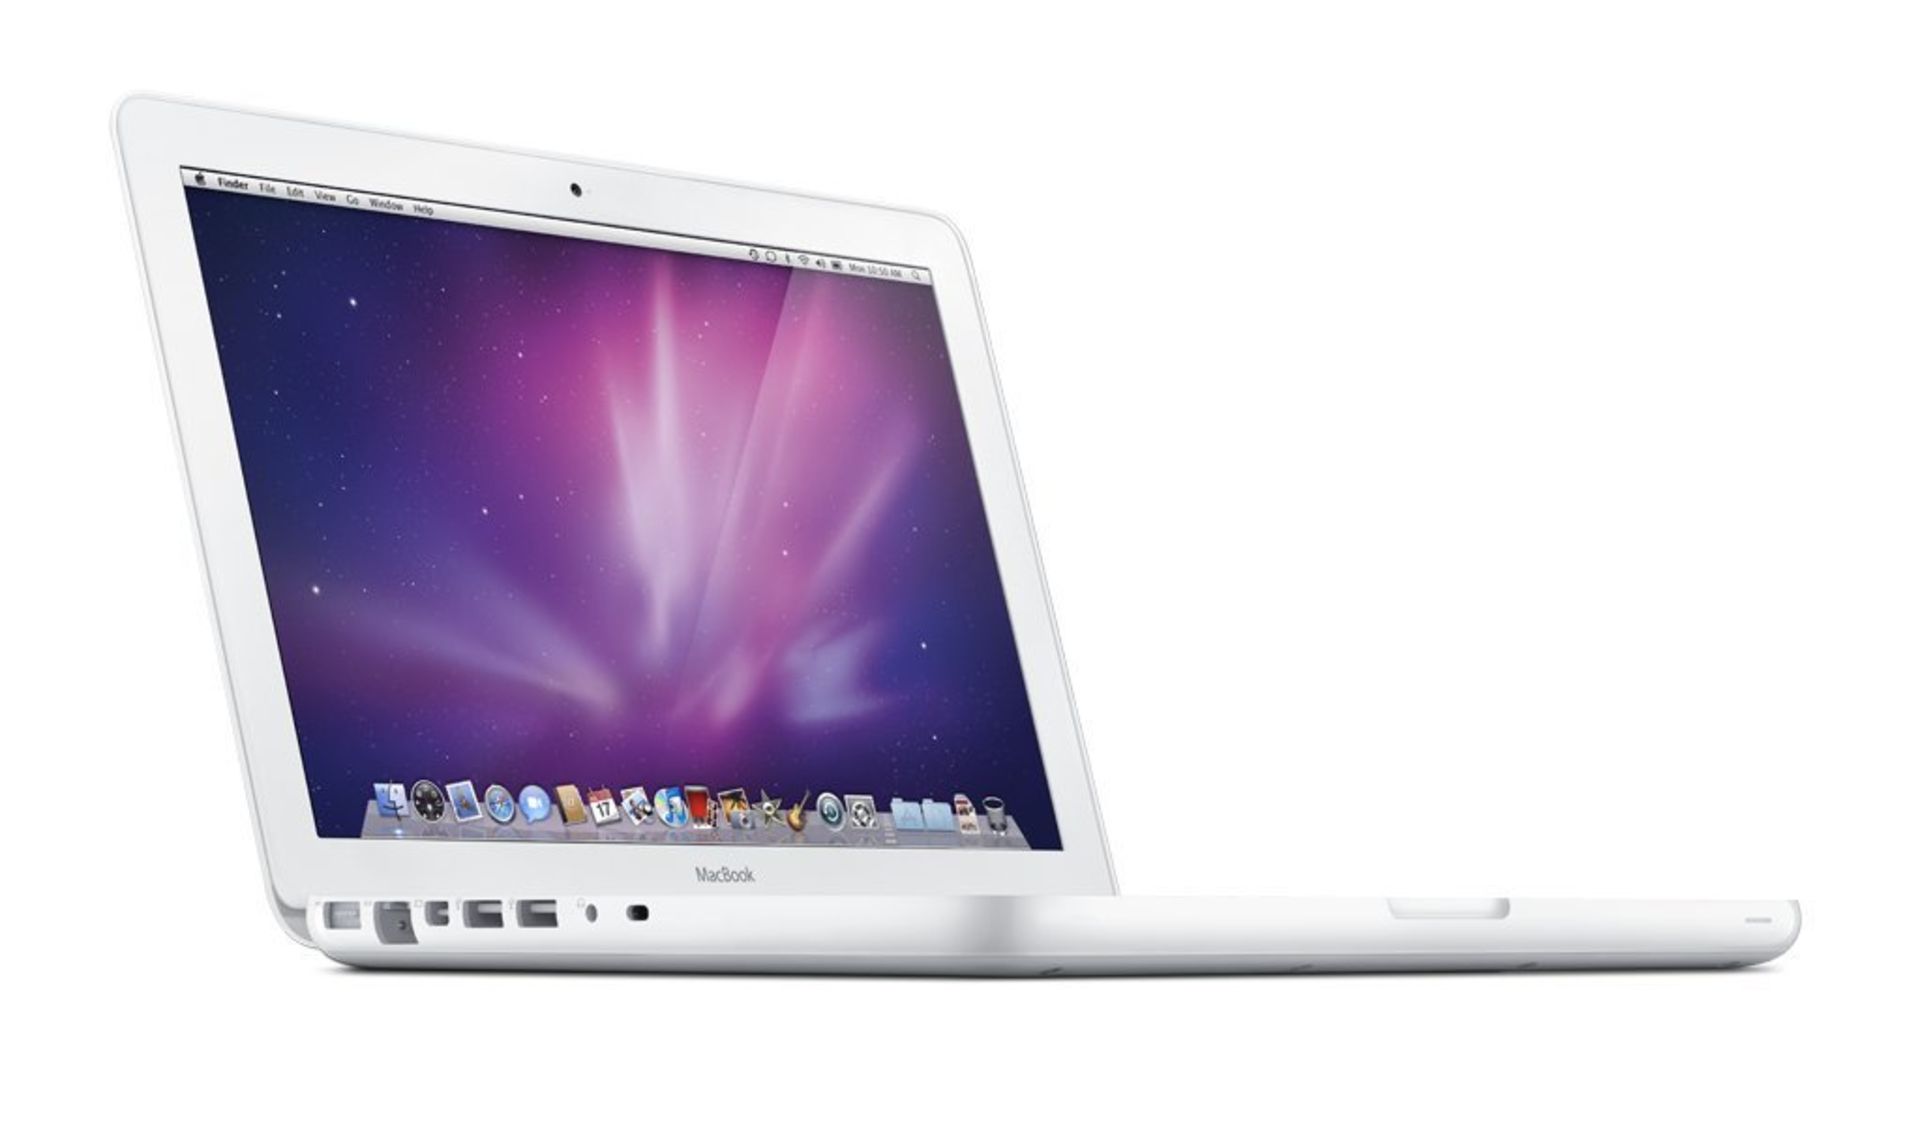 V Grade B Apple Macbook 13.3" Laptop - Core 2 Duo - 2.4 GHz - 2GB RAM - 250GB HDD - Includes Power